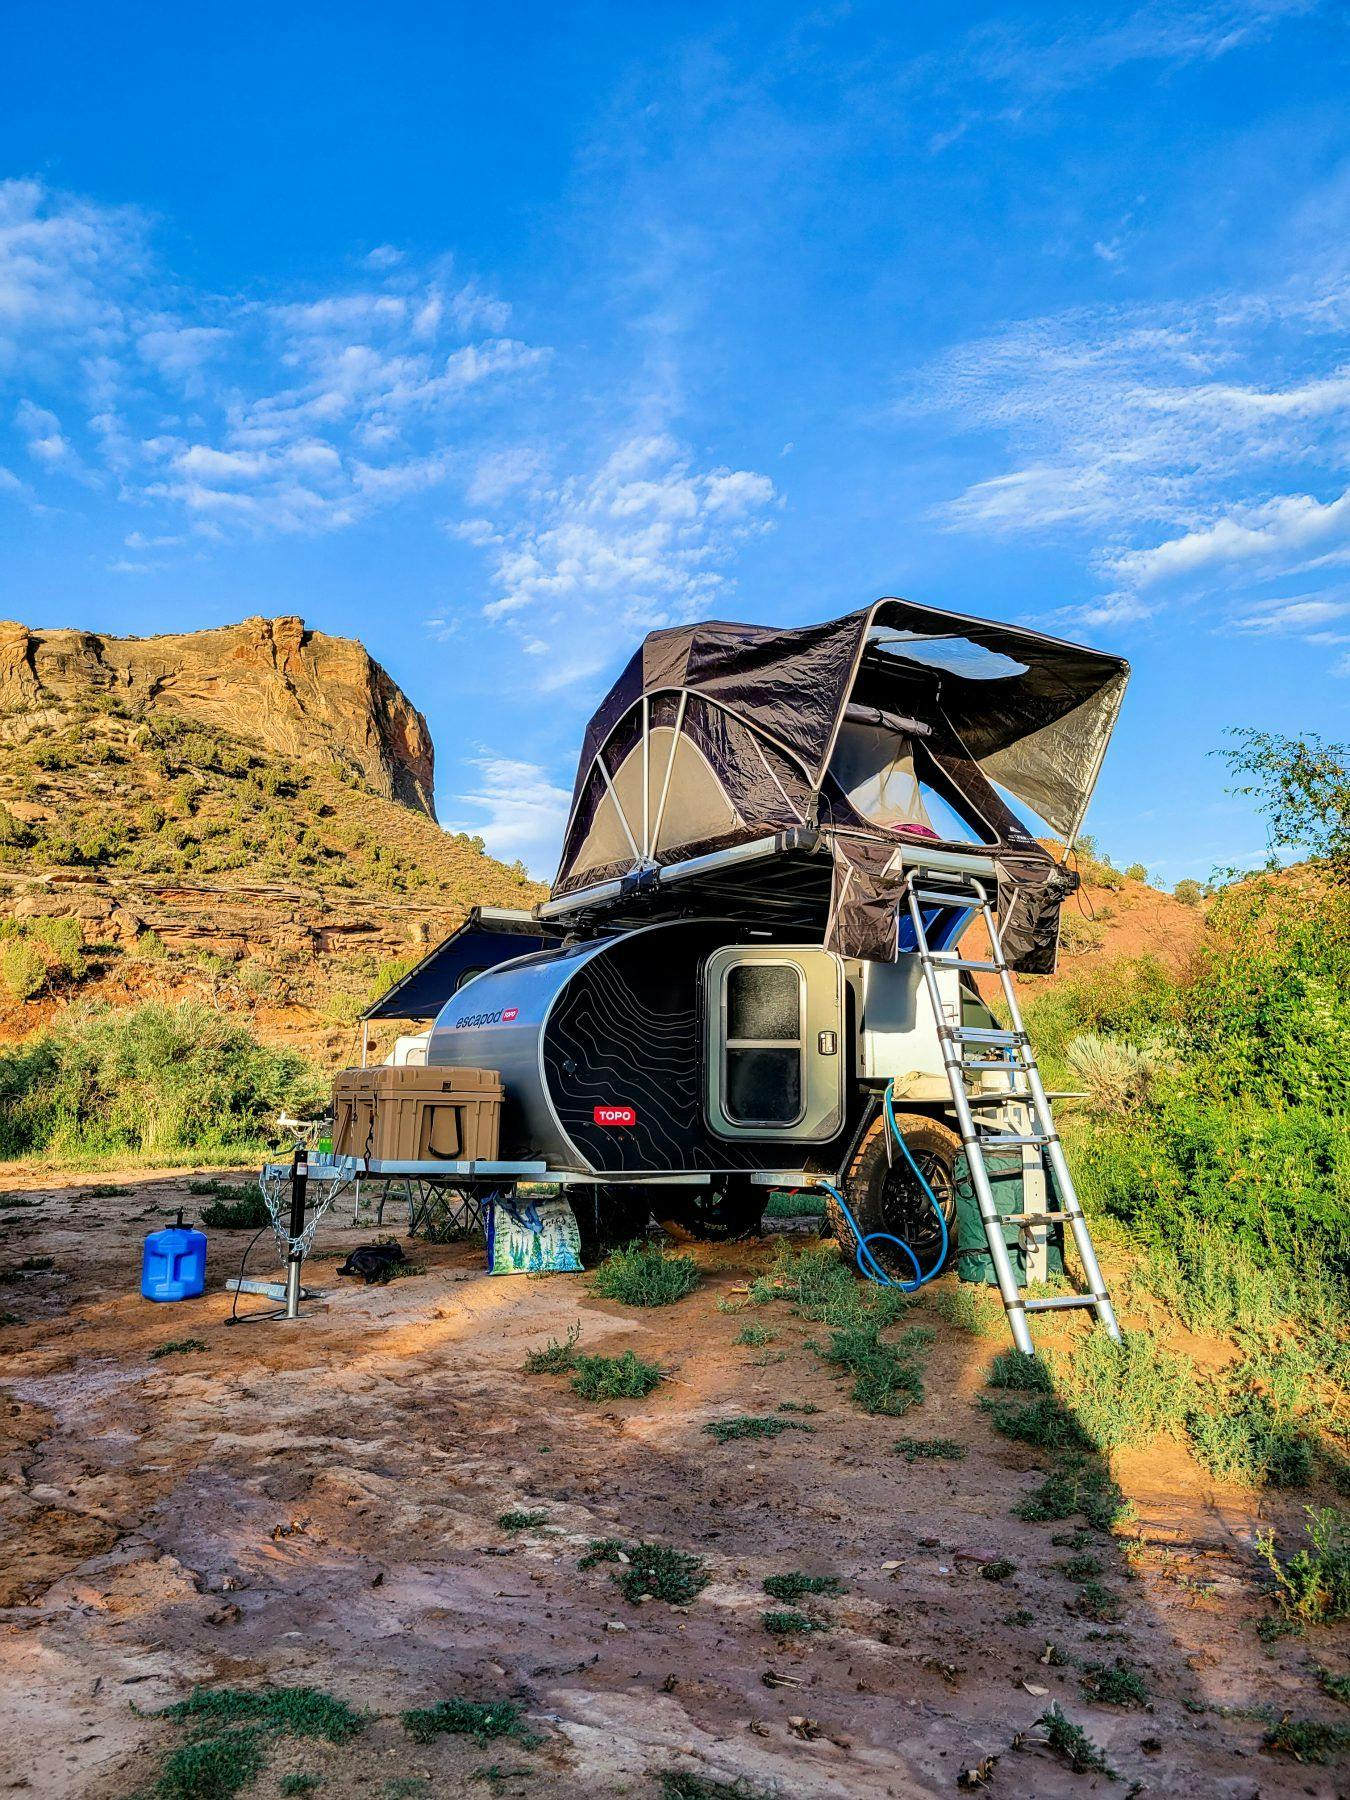 A black teardrop camper set up ina desert landscape with a rooftop tent mounted on top.